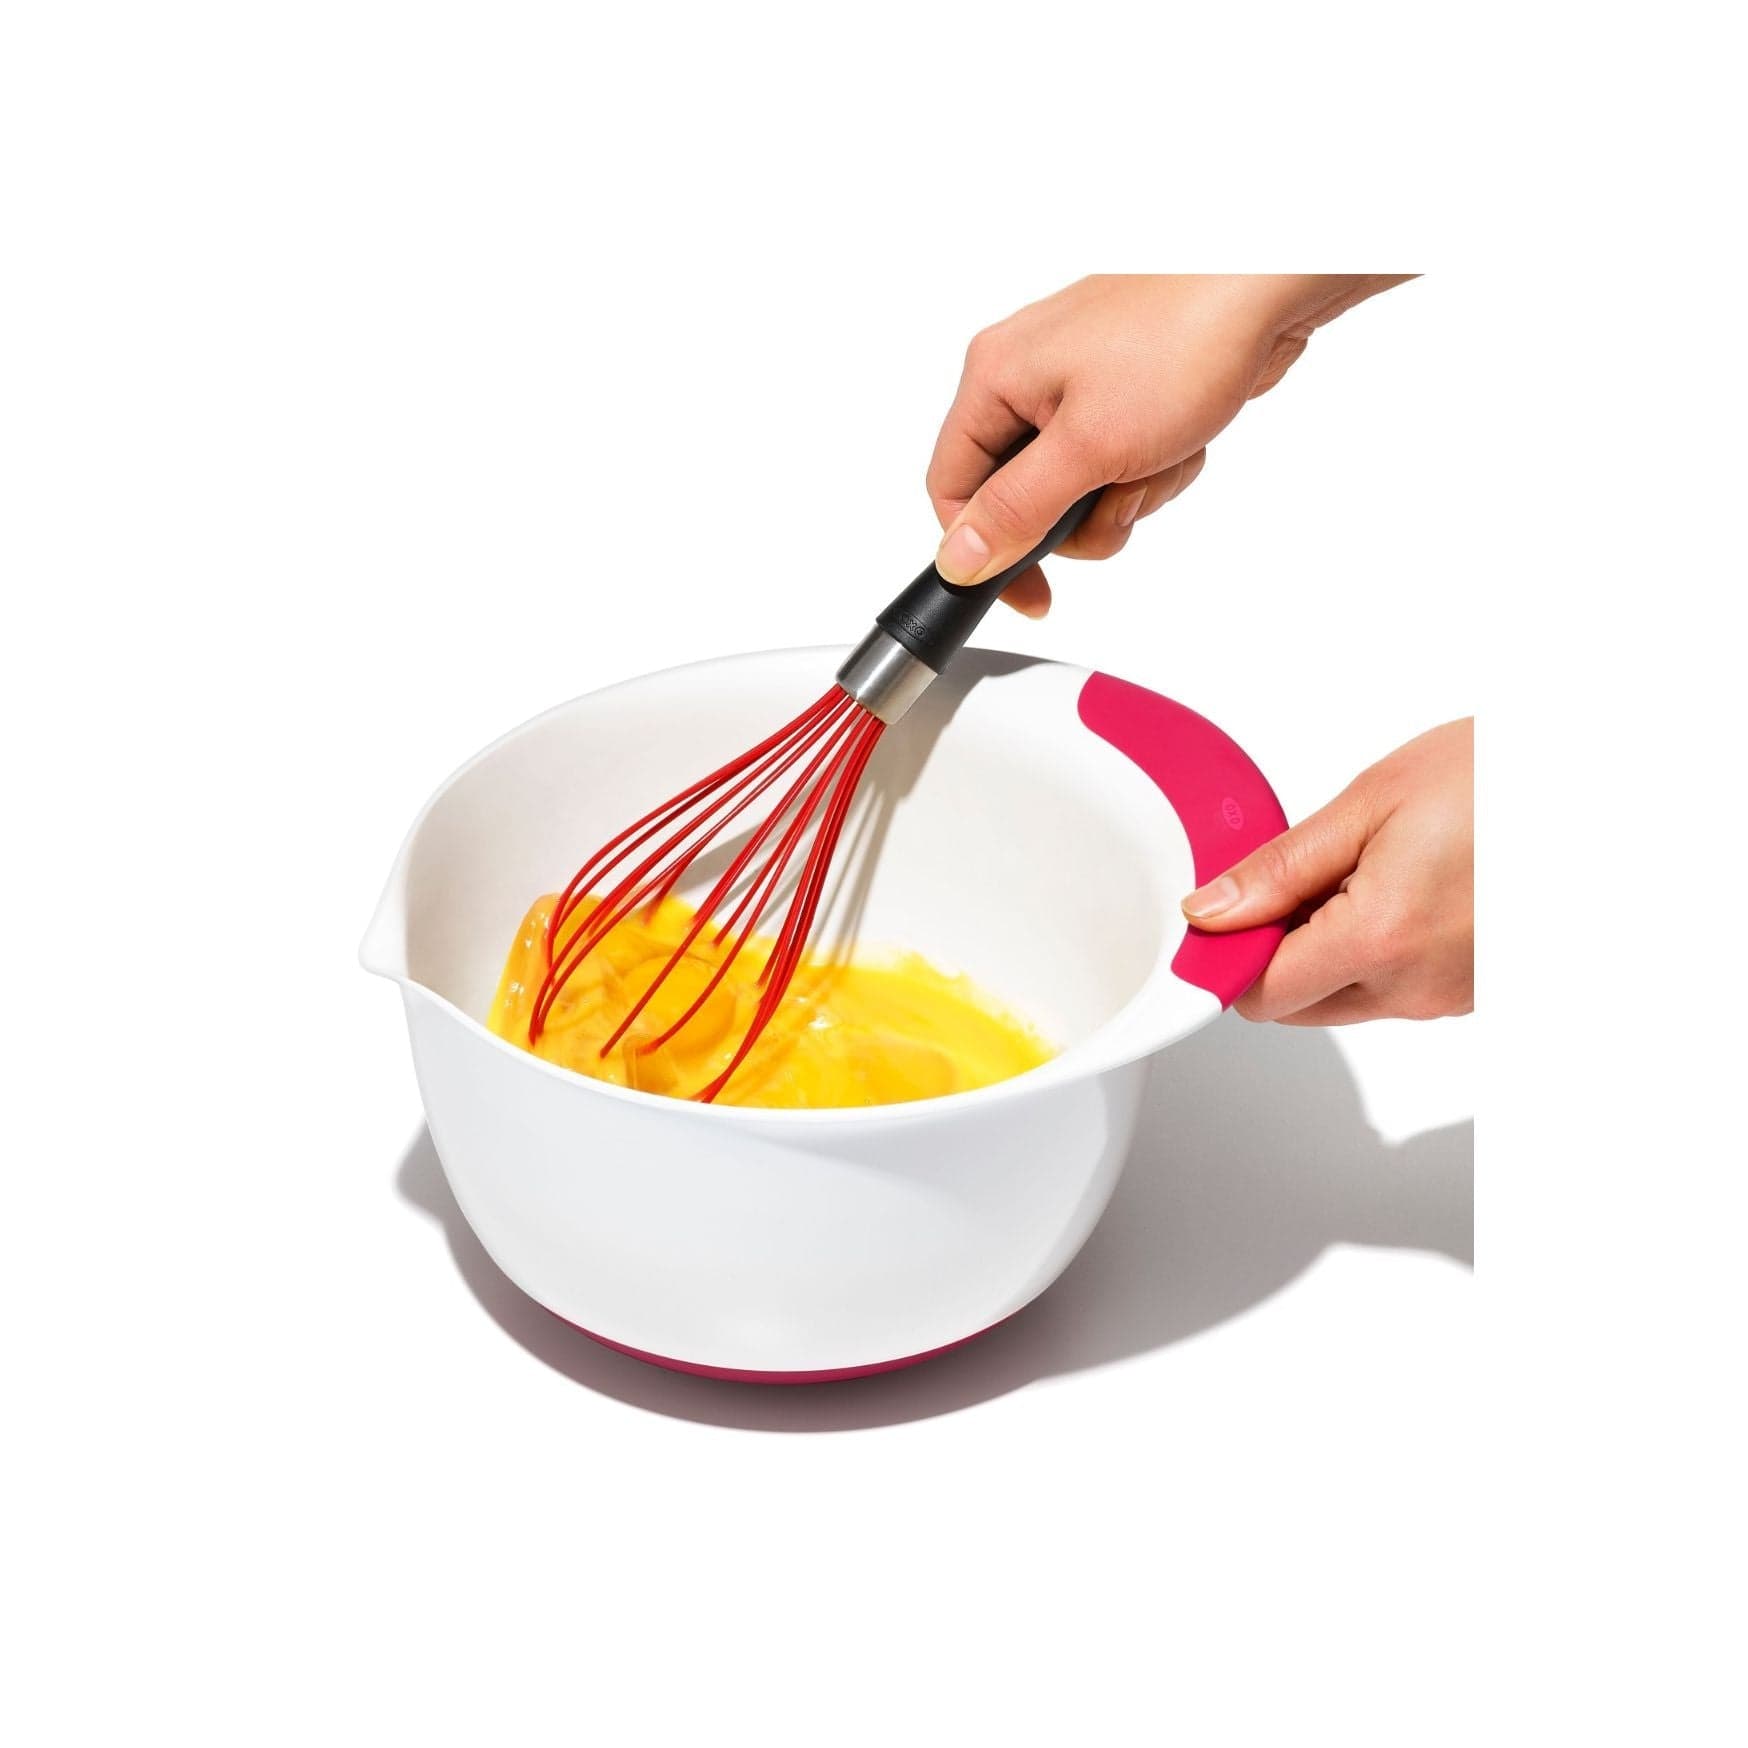  OXO Good Grips 3-Piece Stainless-Steel Mixing Bowl Set